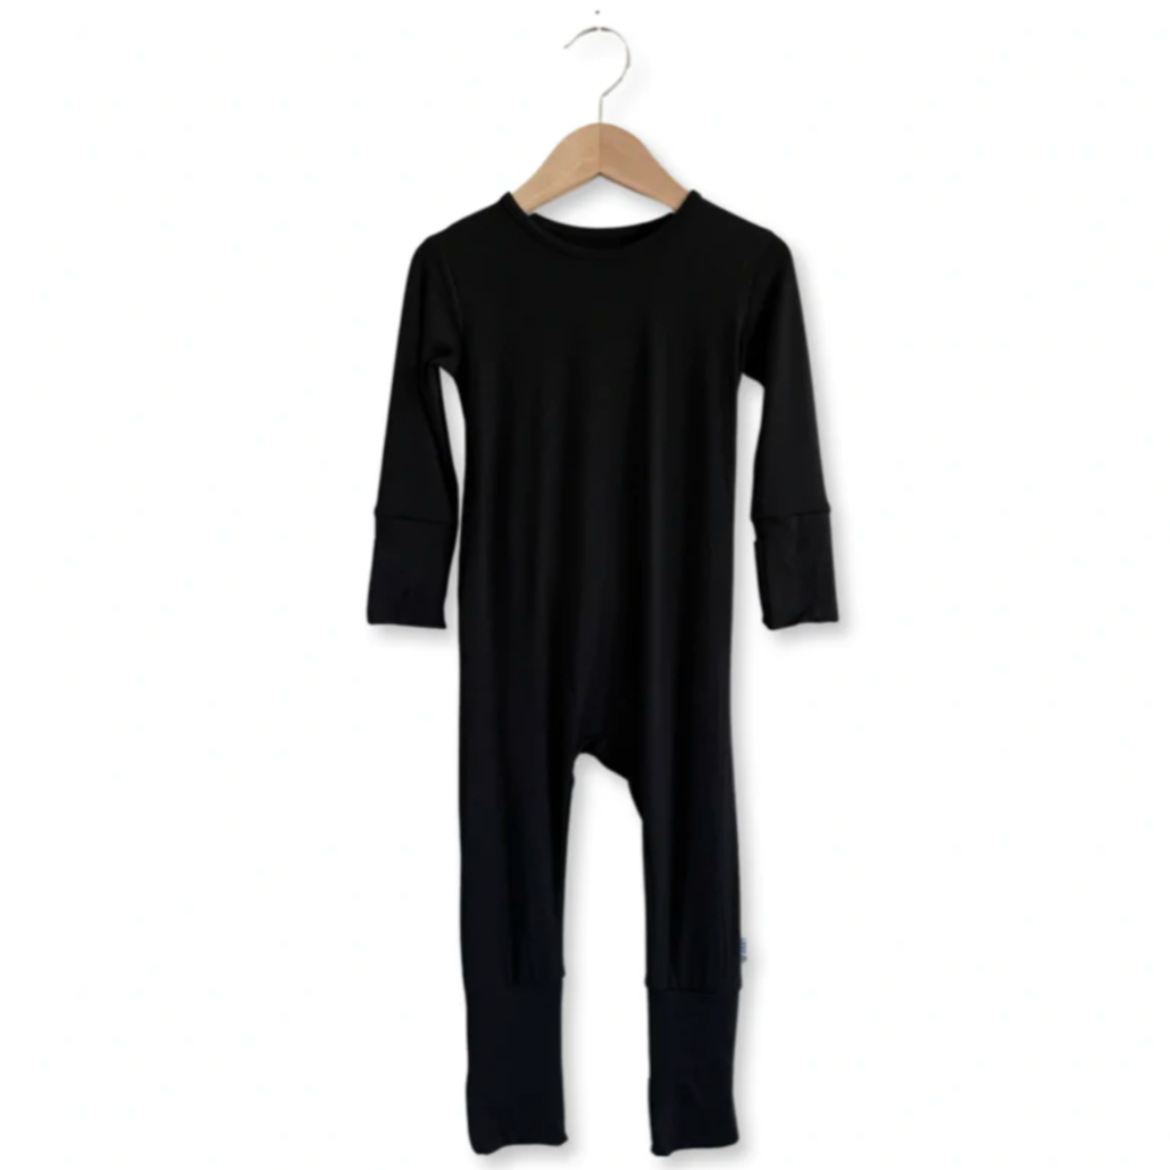 Black At Your Leisure Essential Adult Romper- 3X-5X